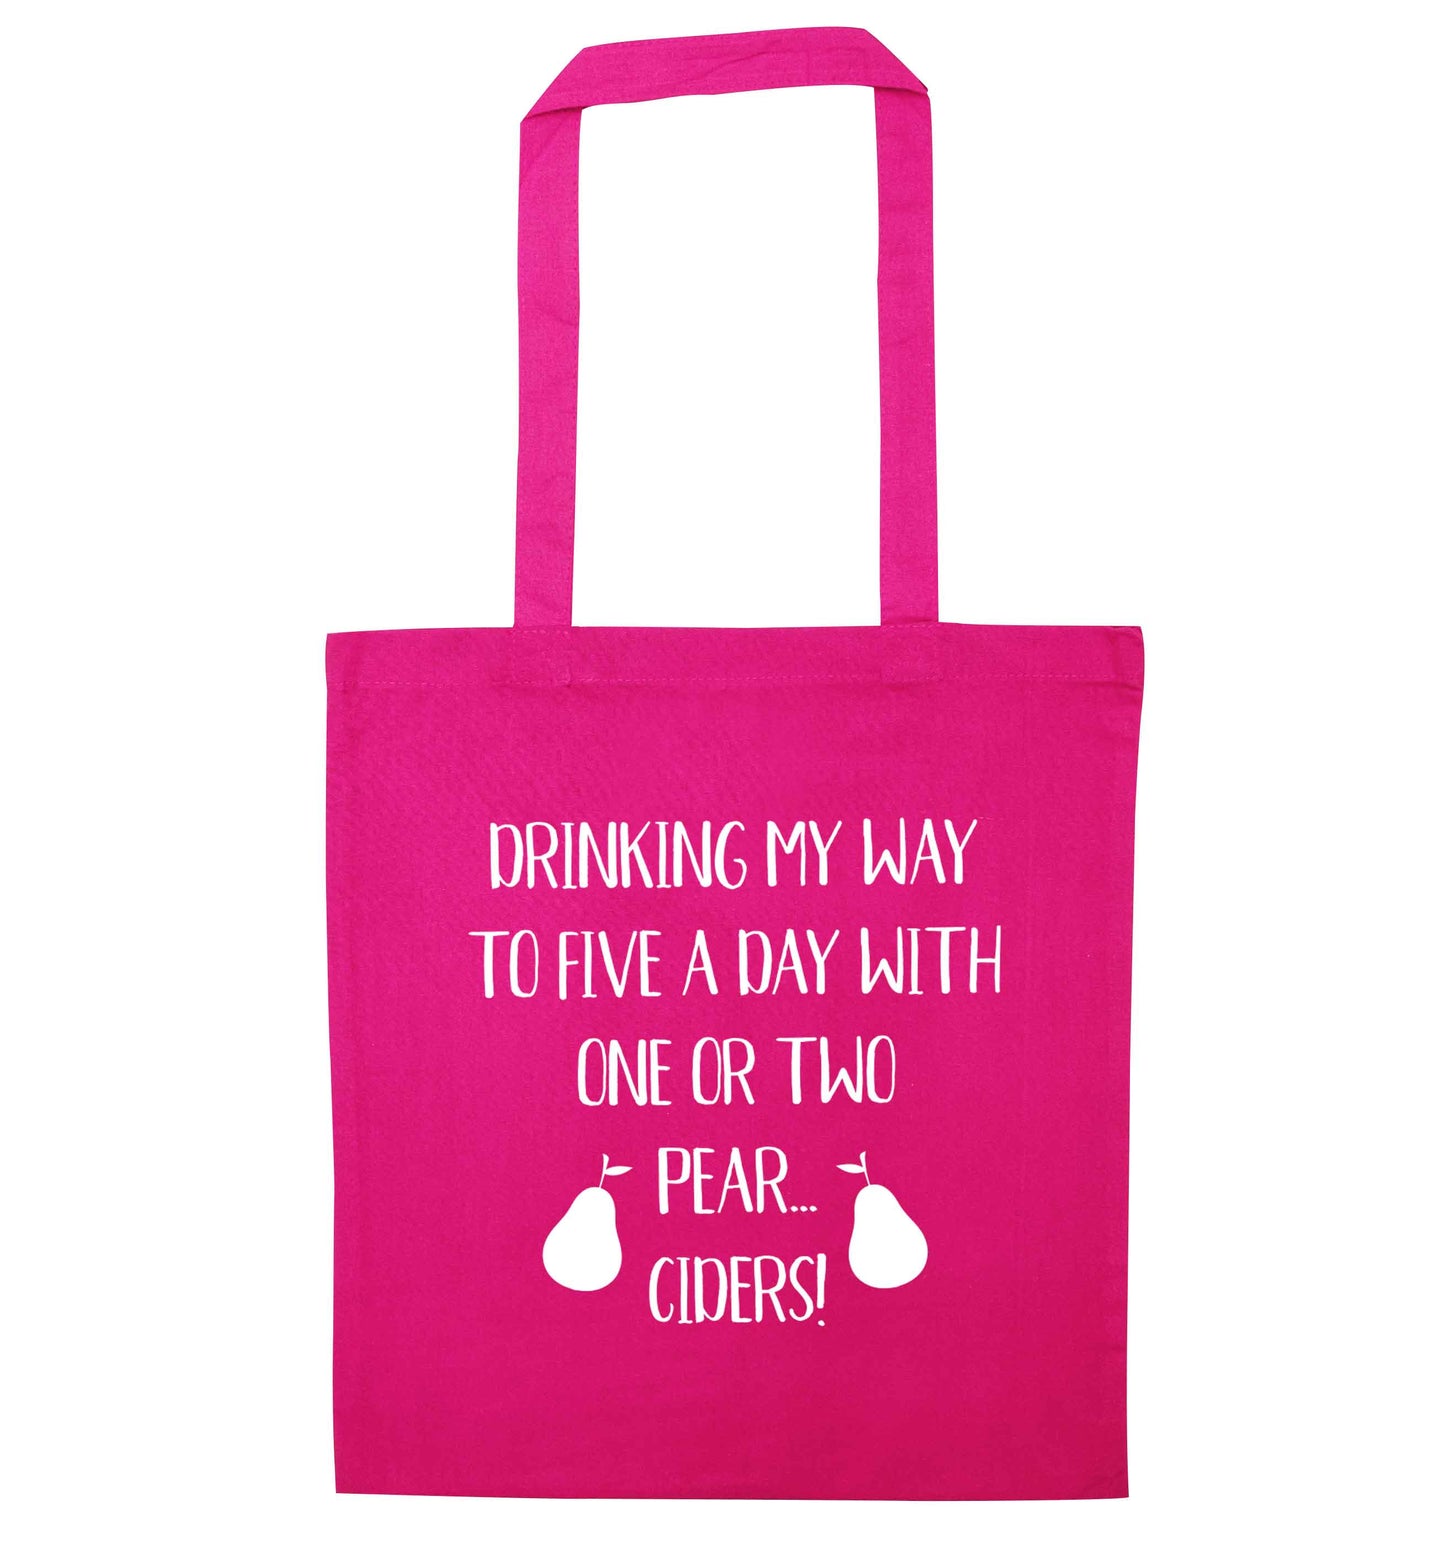 Drinking my way to five a day with one or two strawberry ciders pink tote bag